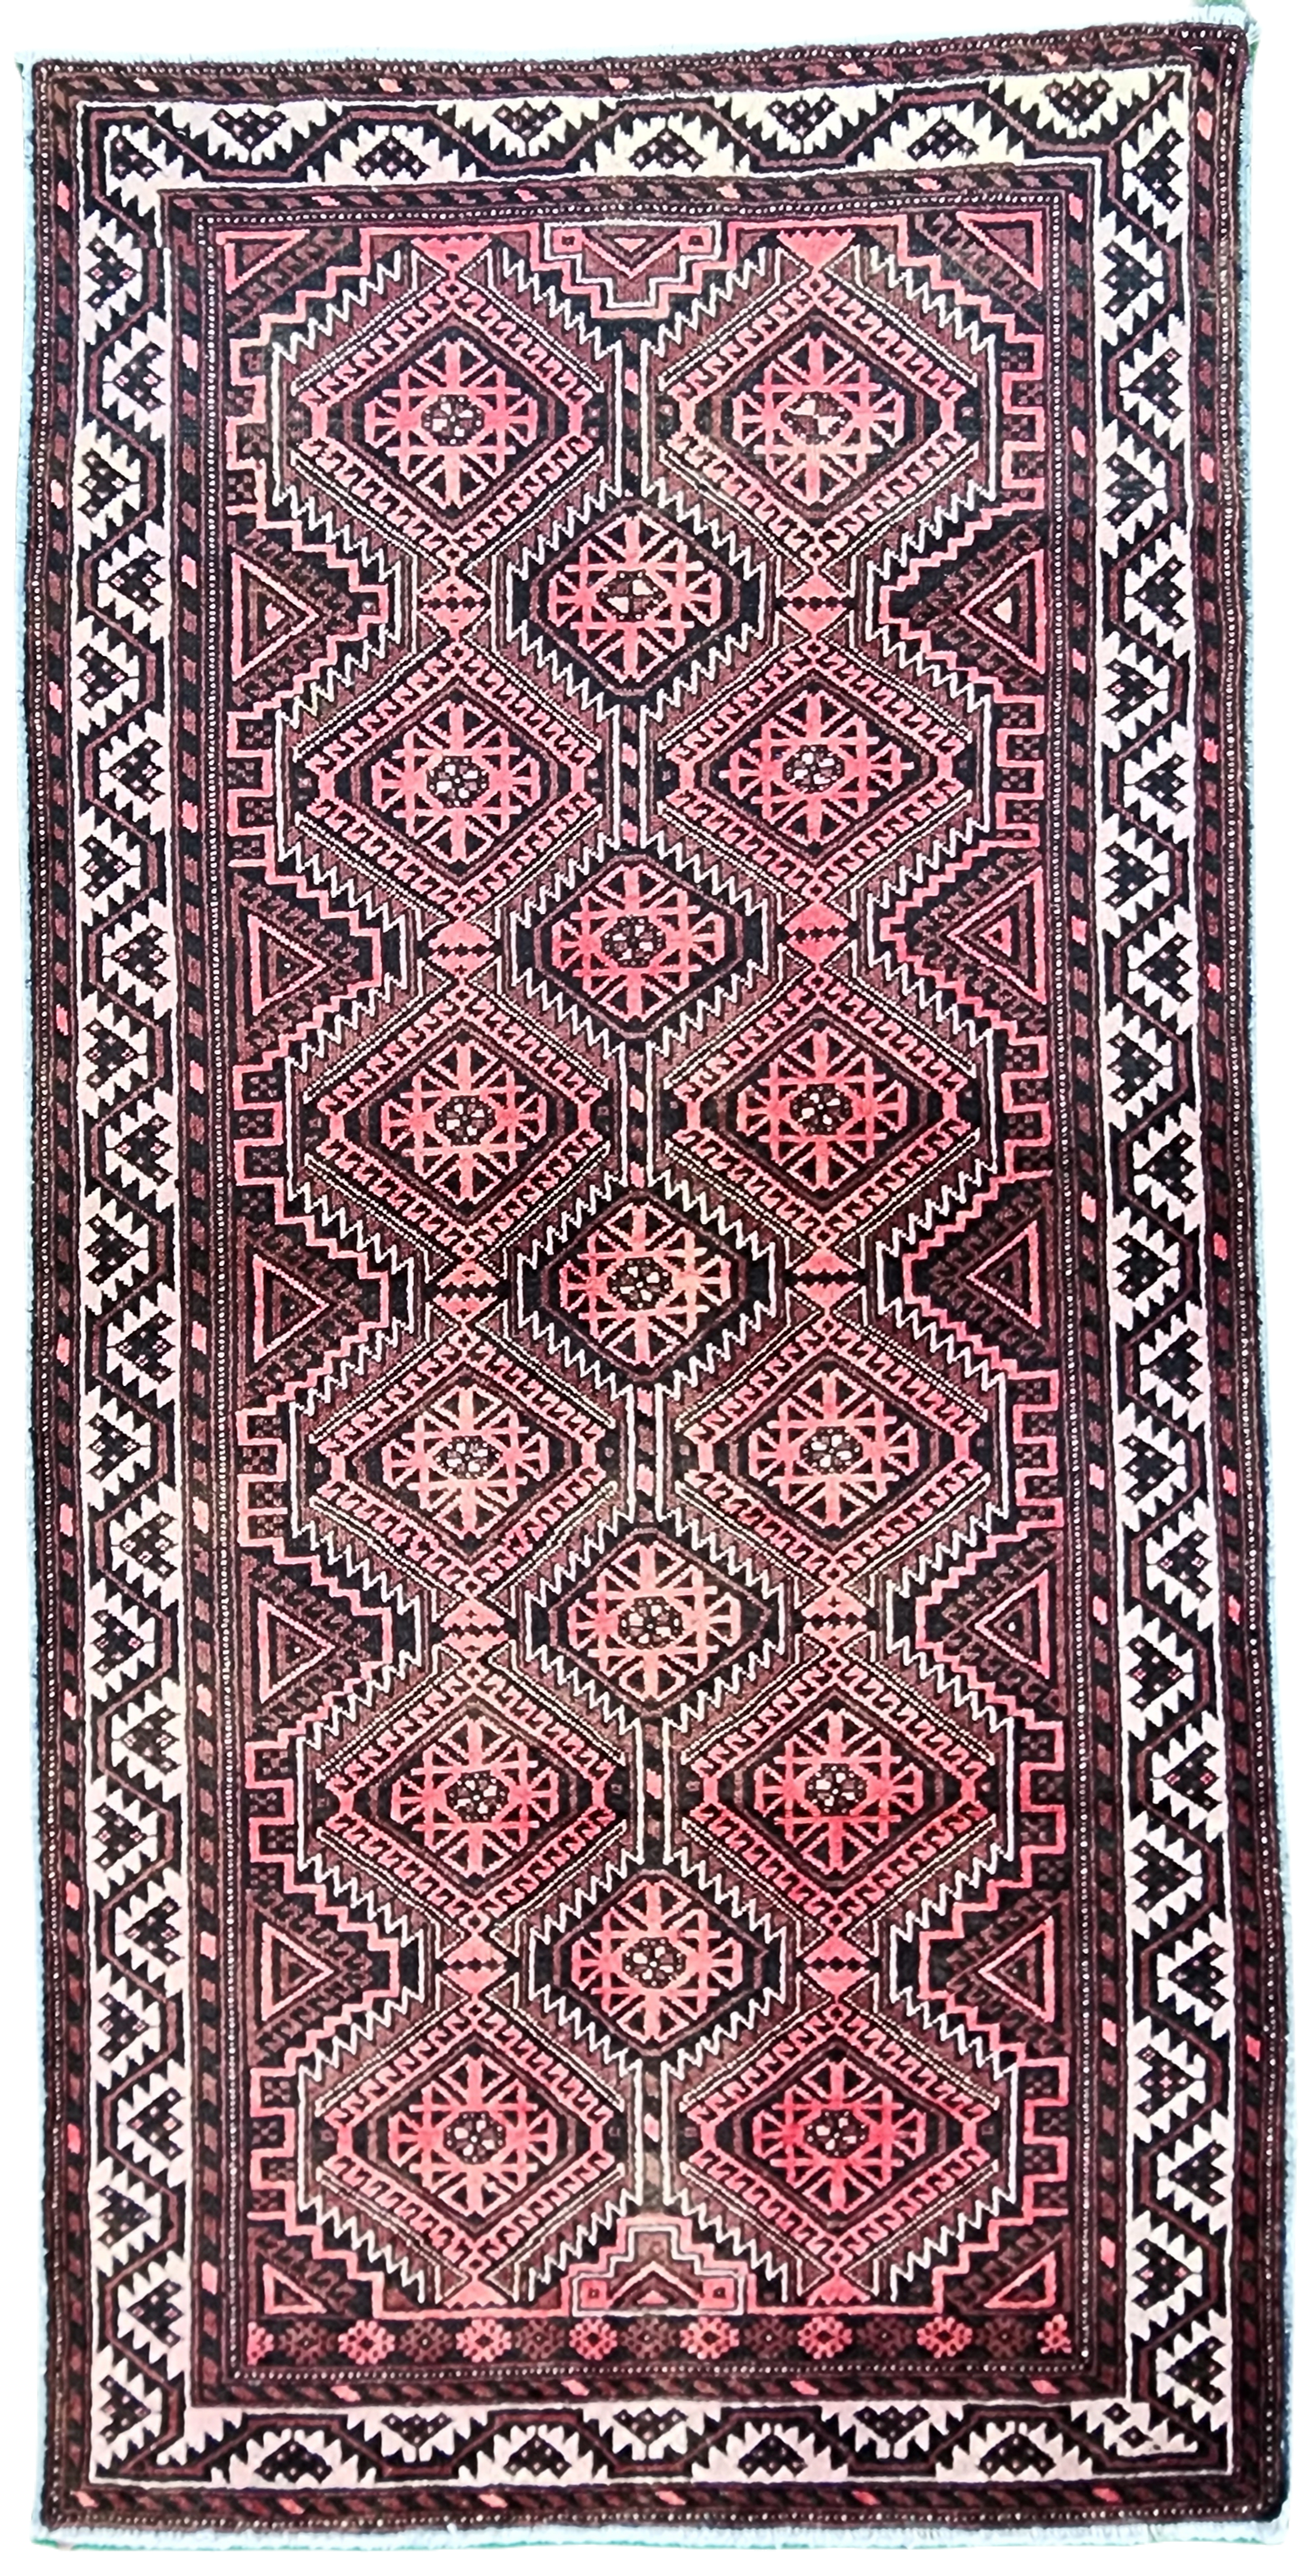 Brown and Beige Antique Persian Rug 6'8'' x 3'6''